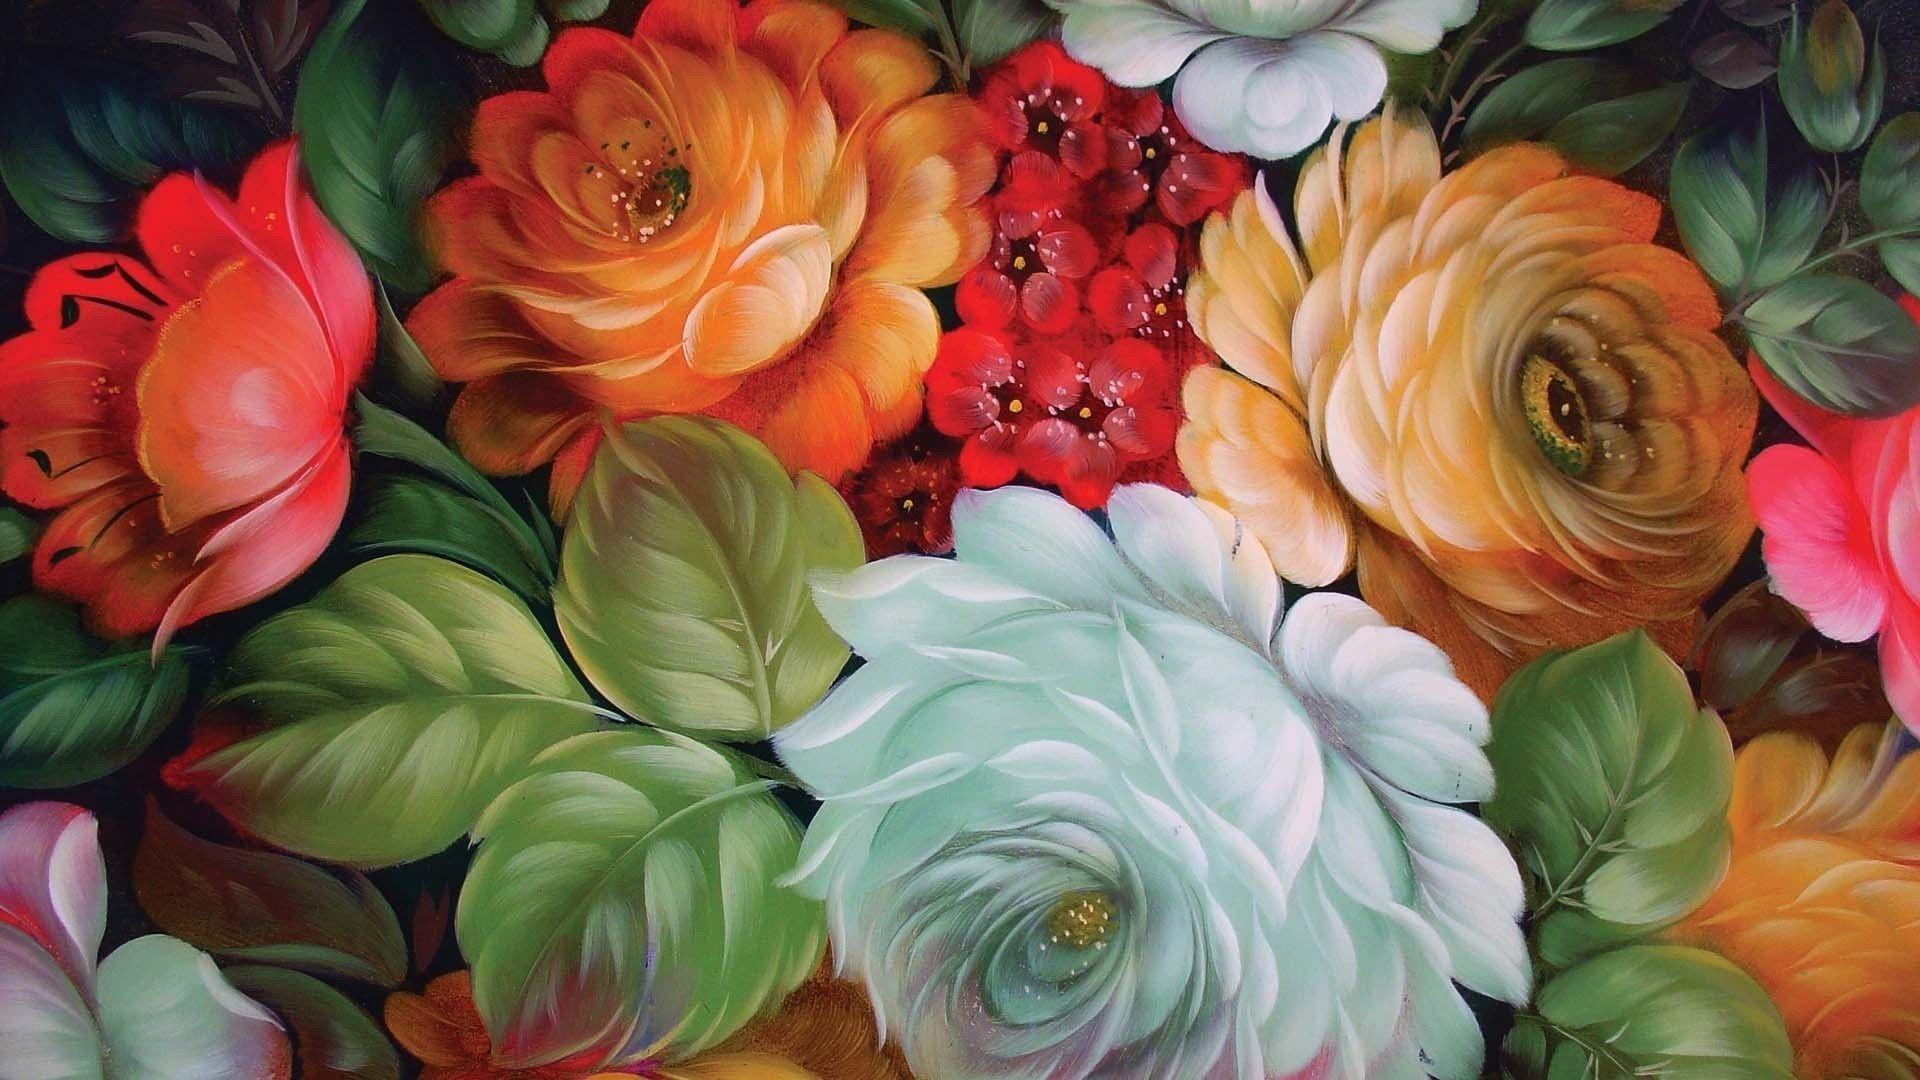 Flowers Art. Top Wallpaper for Android